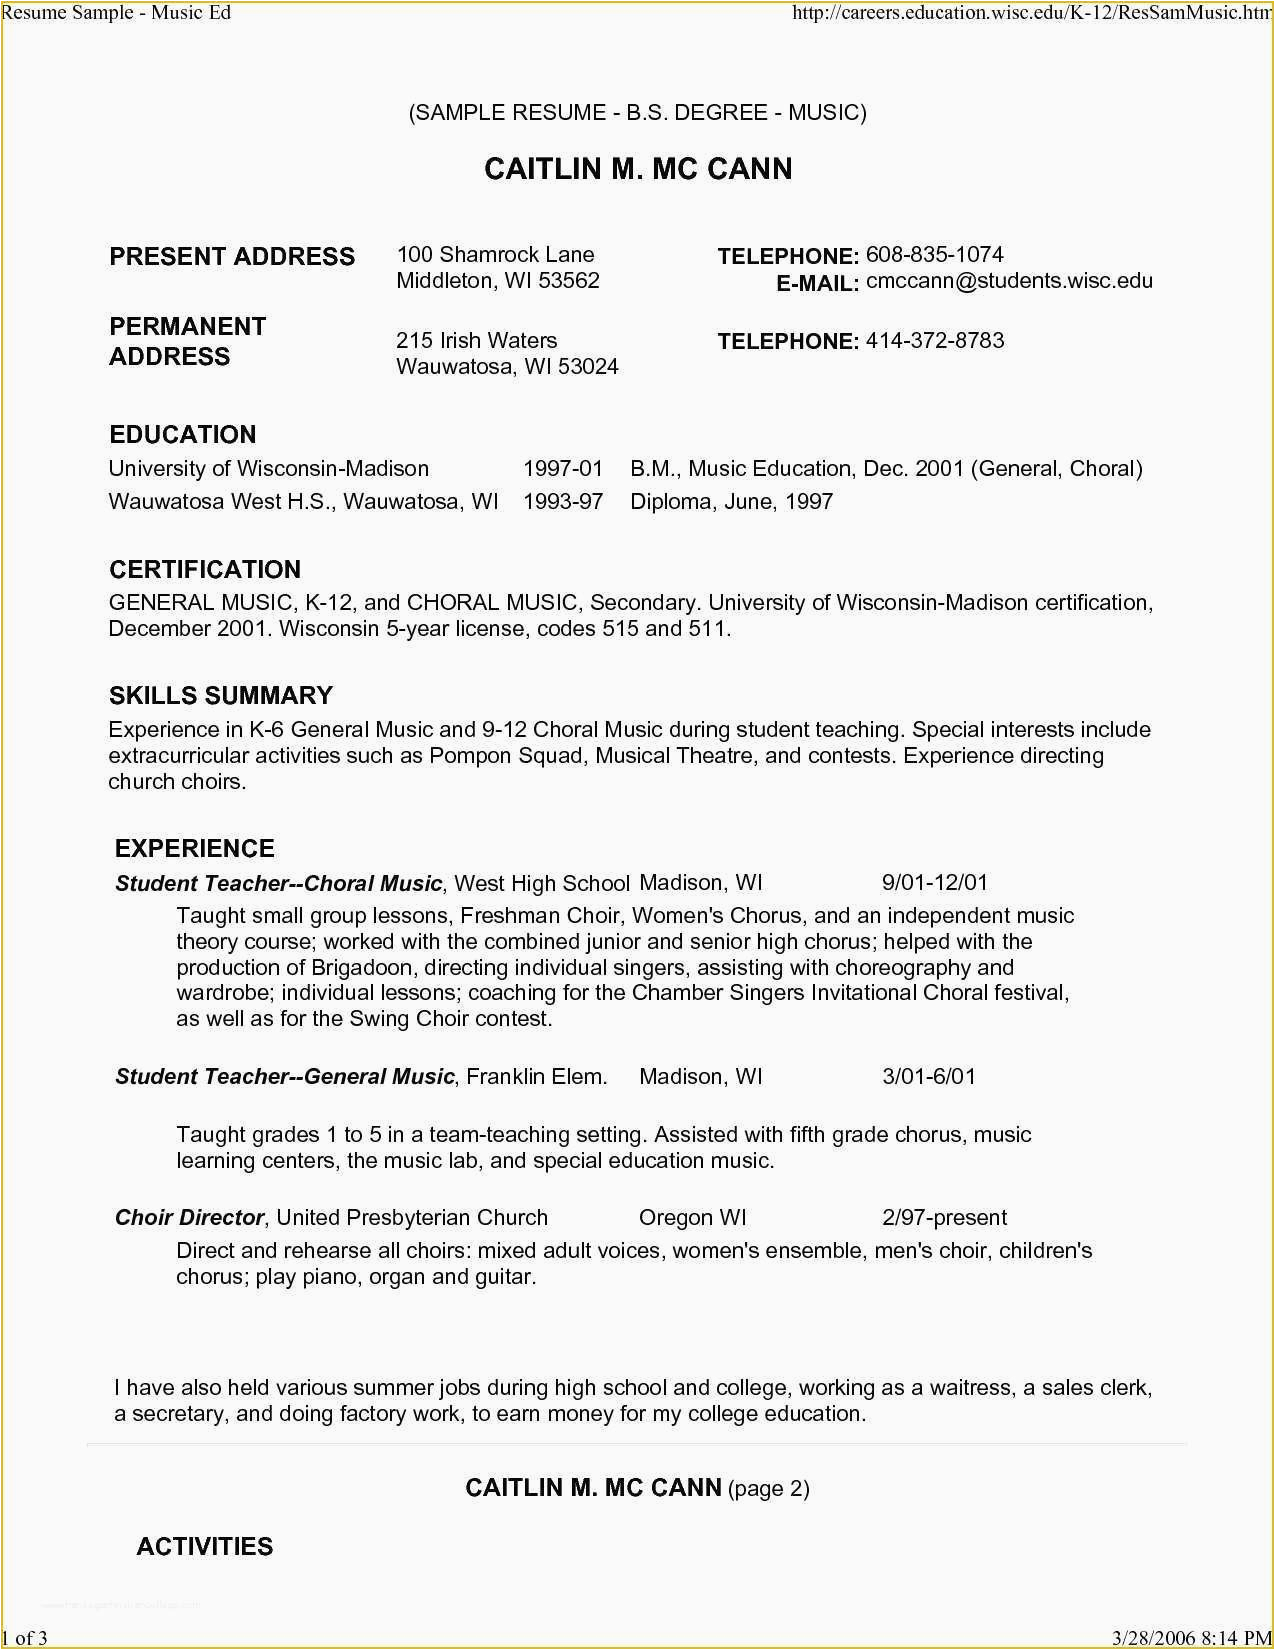 Sample Music Resume for College Application Free Musician Resume Template Musician Resume Template